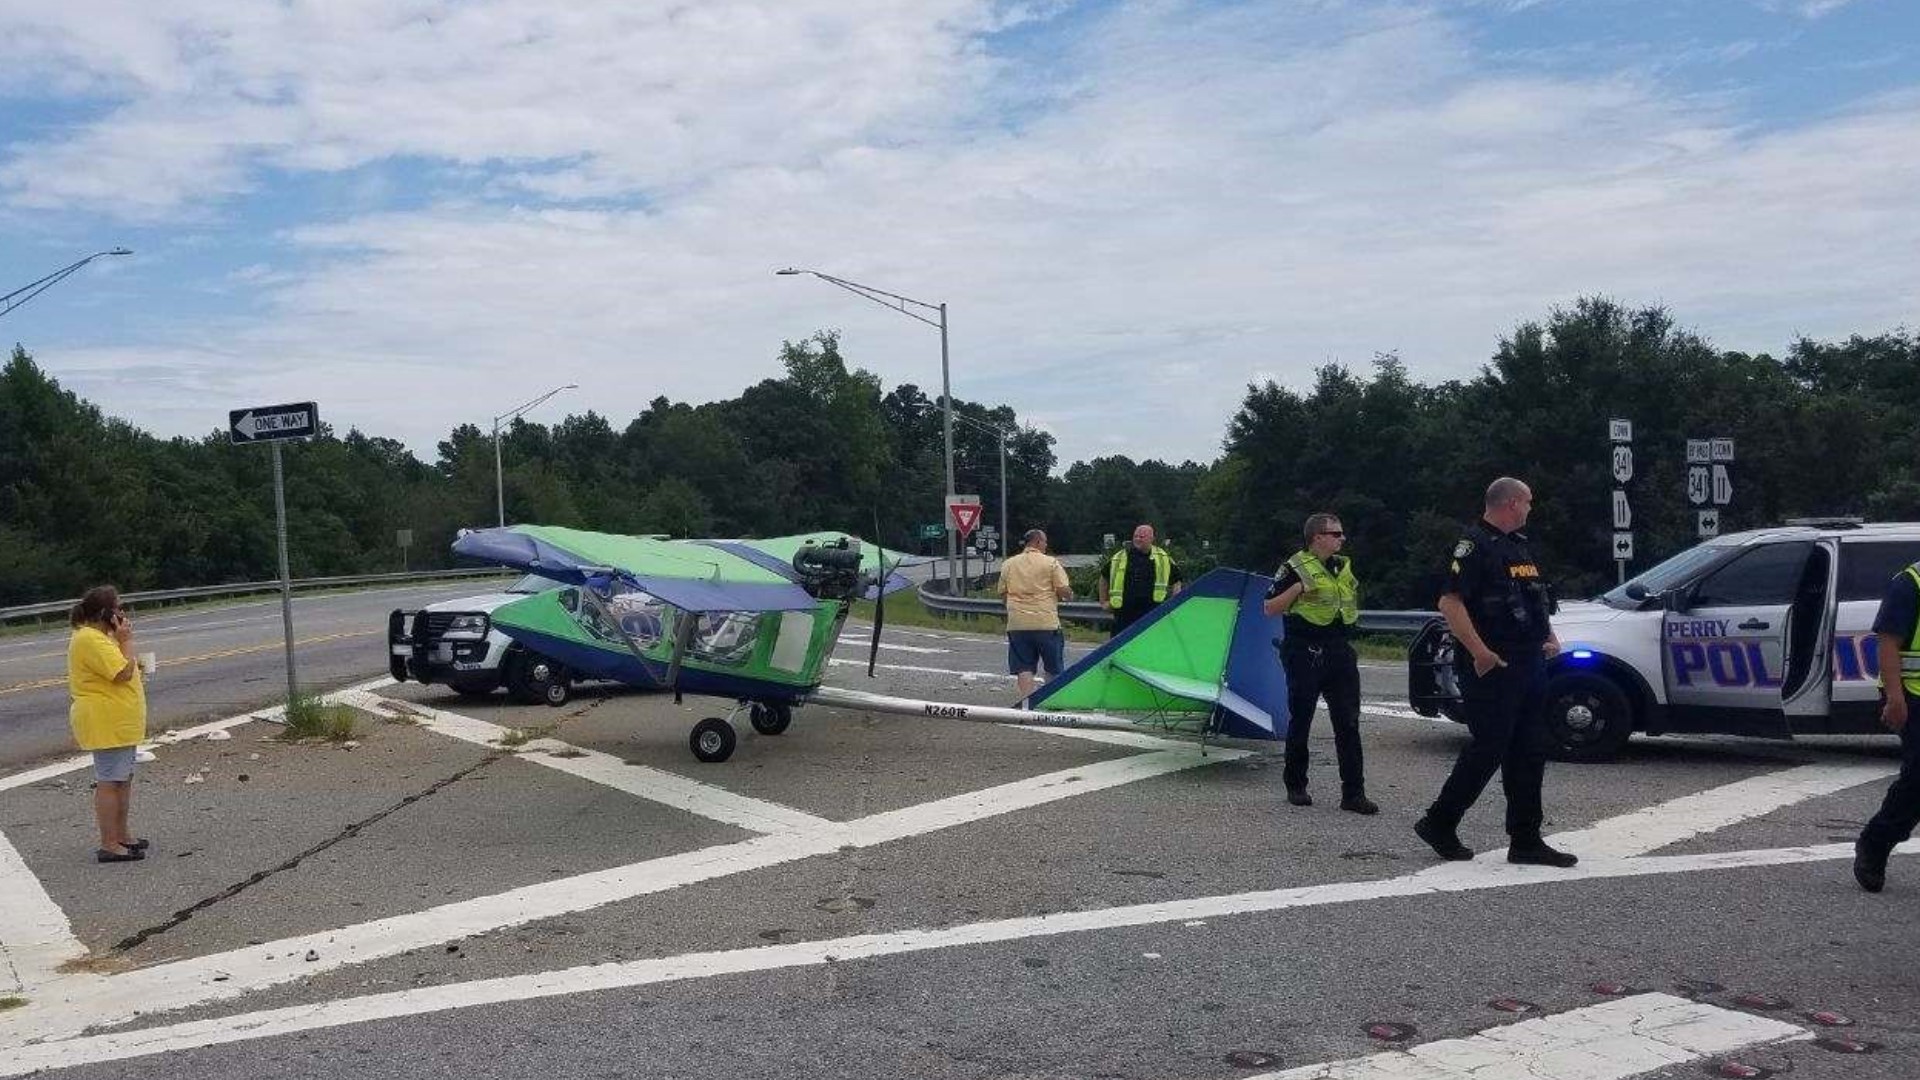 According to Captain Heath Dykes with the Perry Police Department, an ultralight plane made an emergency landing on exit 138 in Perry.